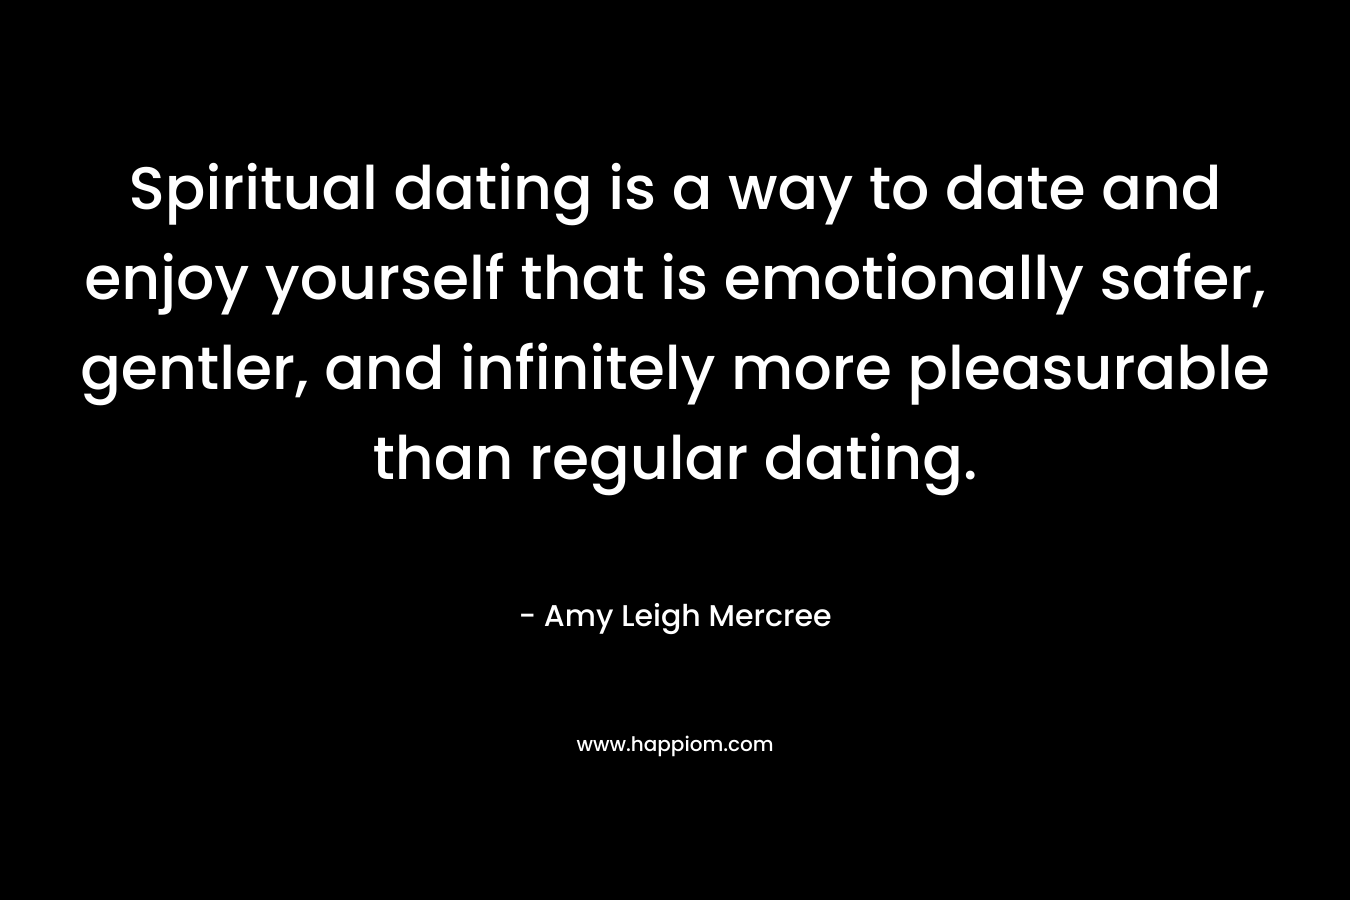 Spiritual dating is a way to date and enjoy yourself that is emotionally safer, gentler, and infinitely more pleasurable than regular dating.